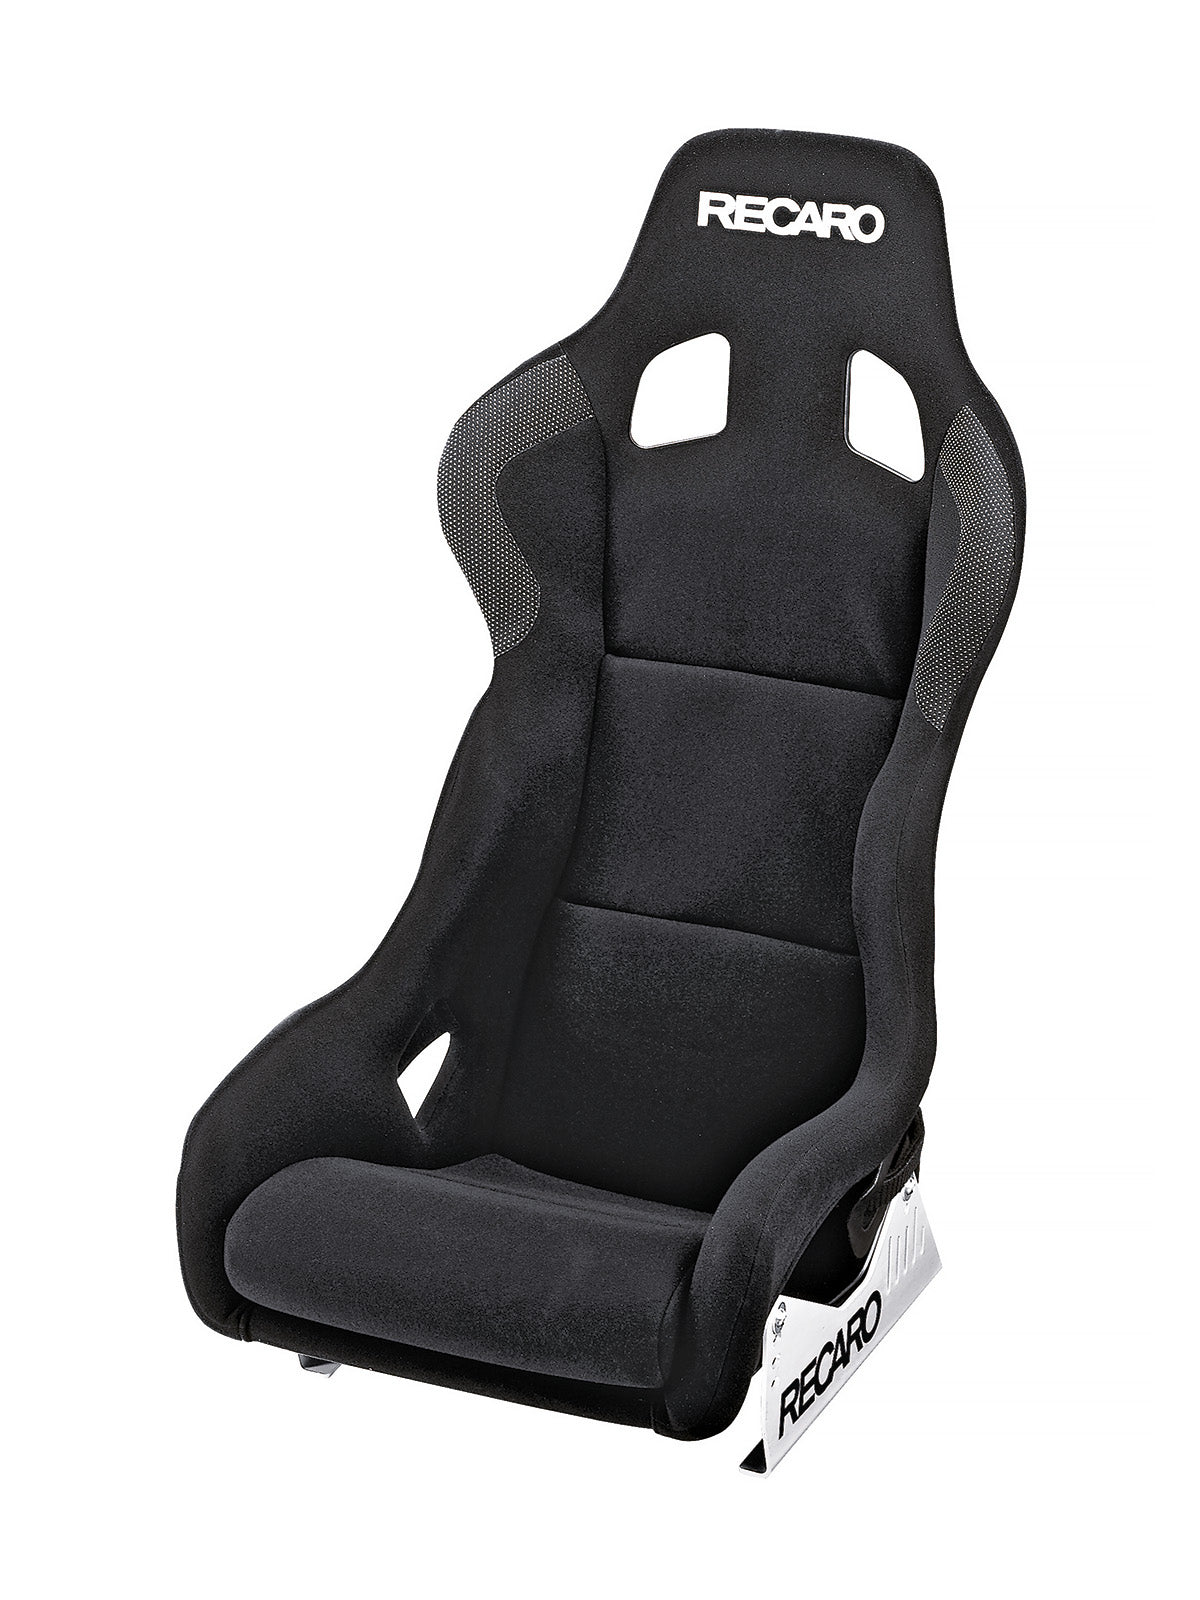 Experience unrivaled comfort and support with the Recaro Profi SPG XL Racing Seat, perfect for endurance racing.